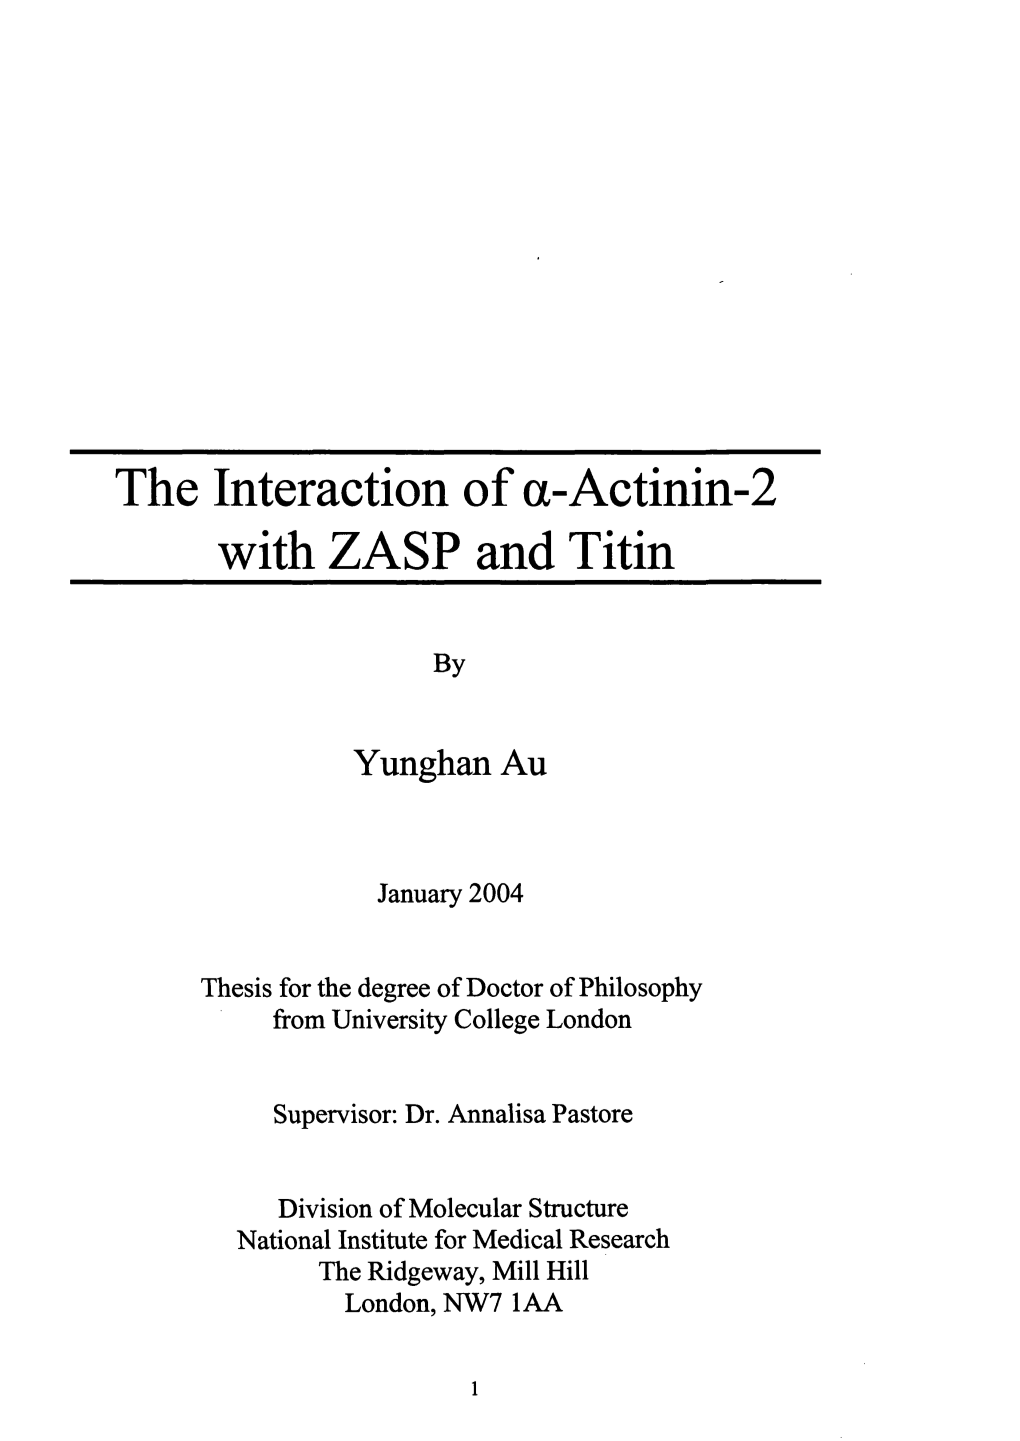 The Interaction of A-Actinin-2 with ZASP and Titin